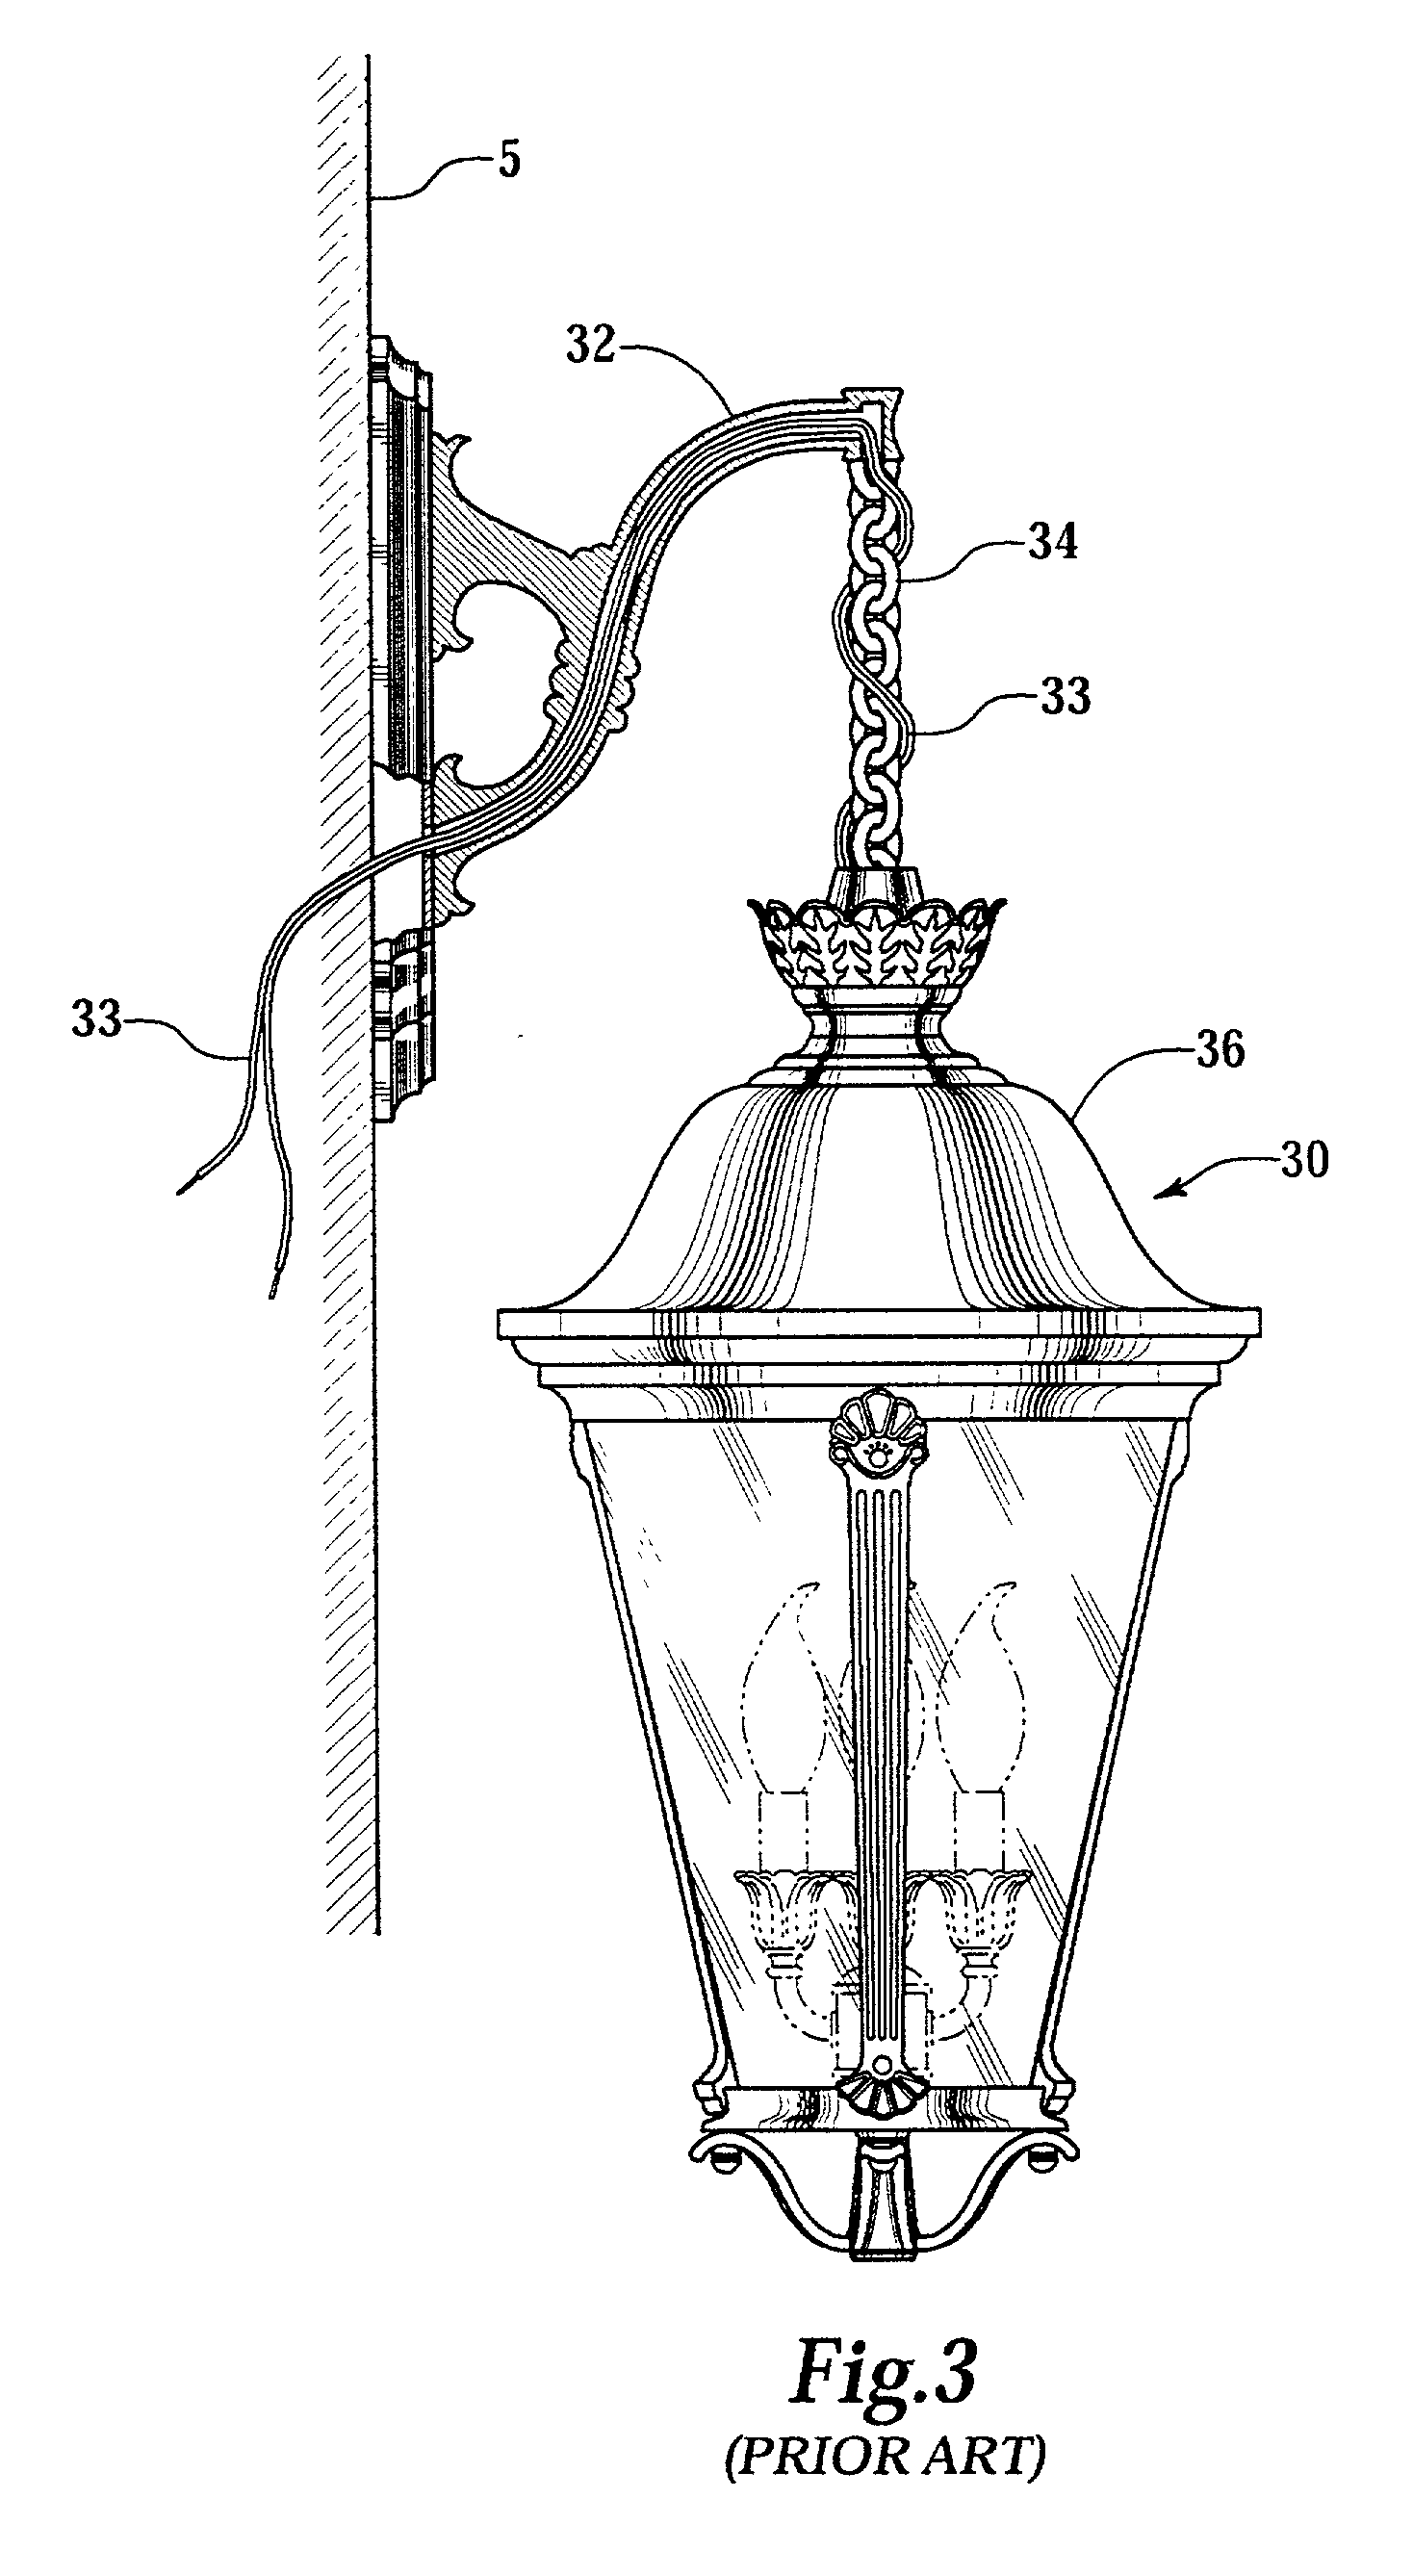 Lighting fixture with enclosed wiring